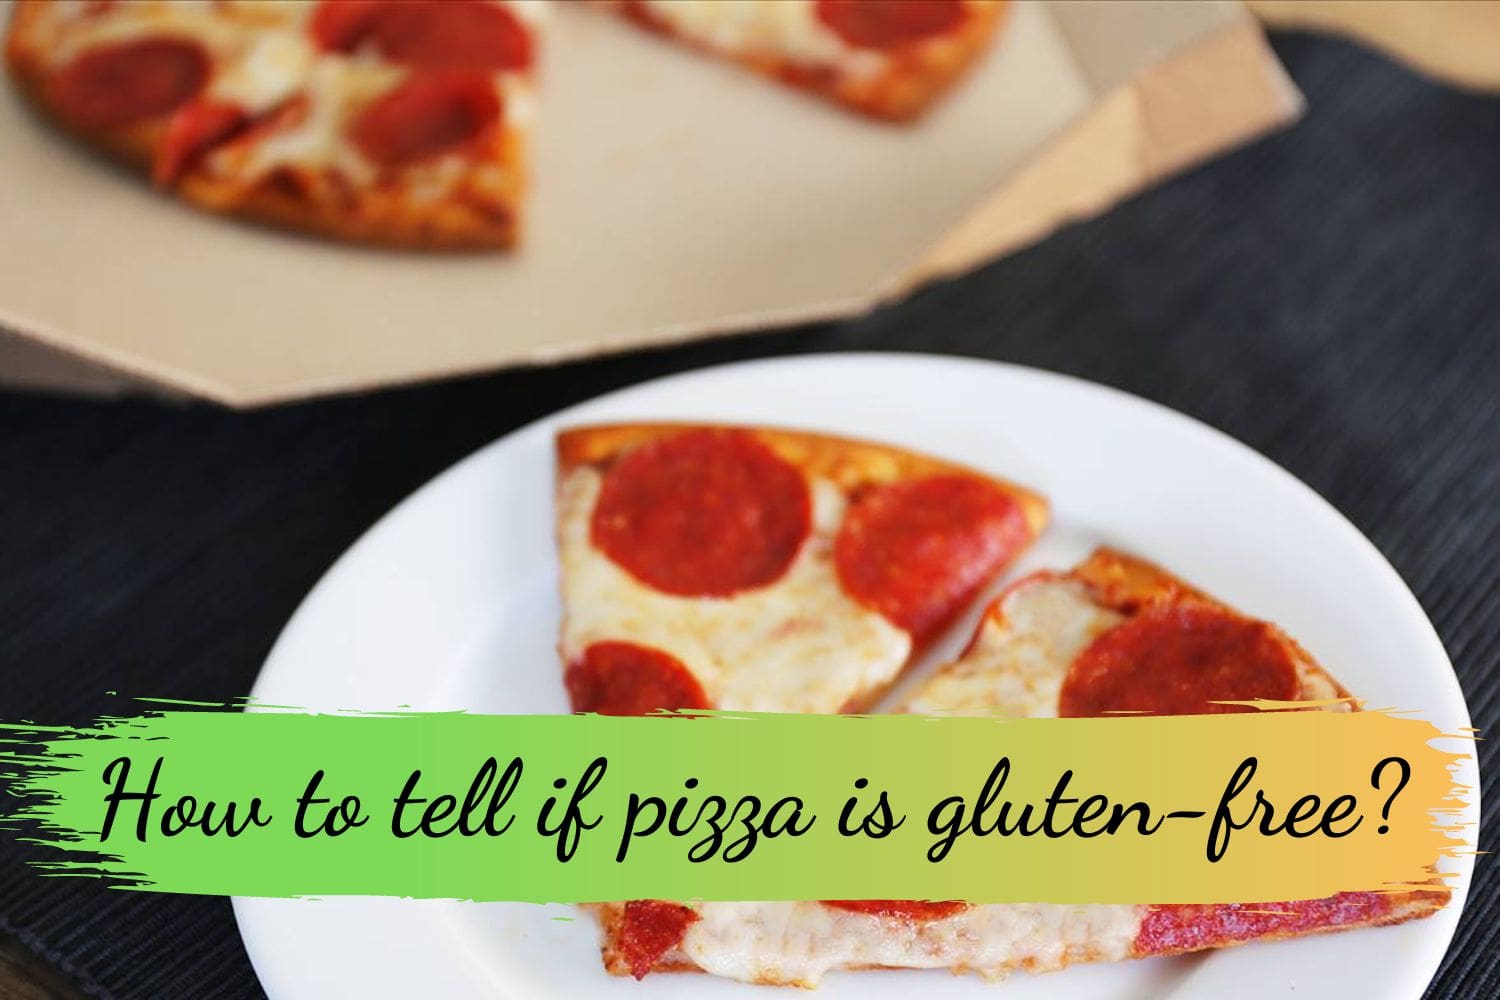 How to tell if pizza is gluten-free?